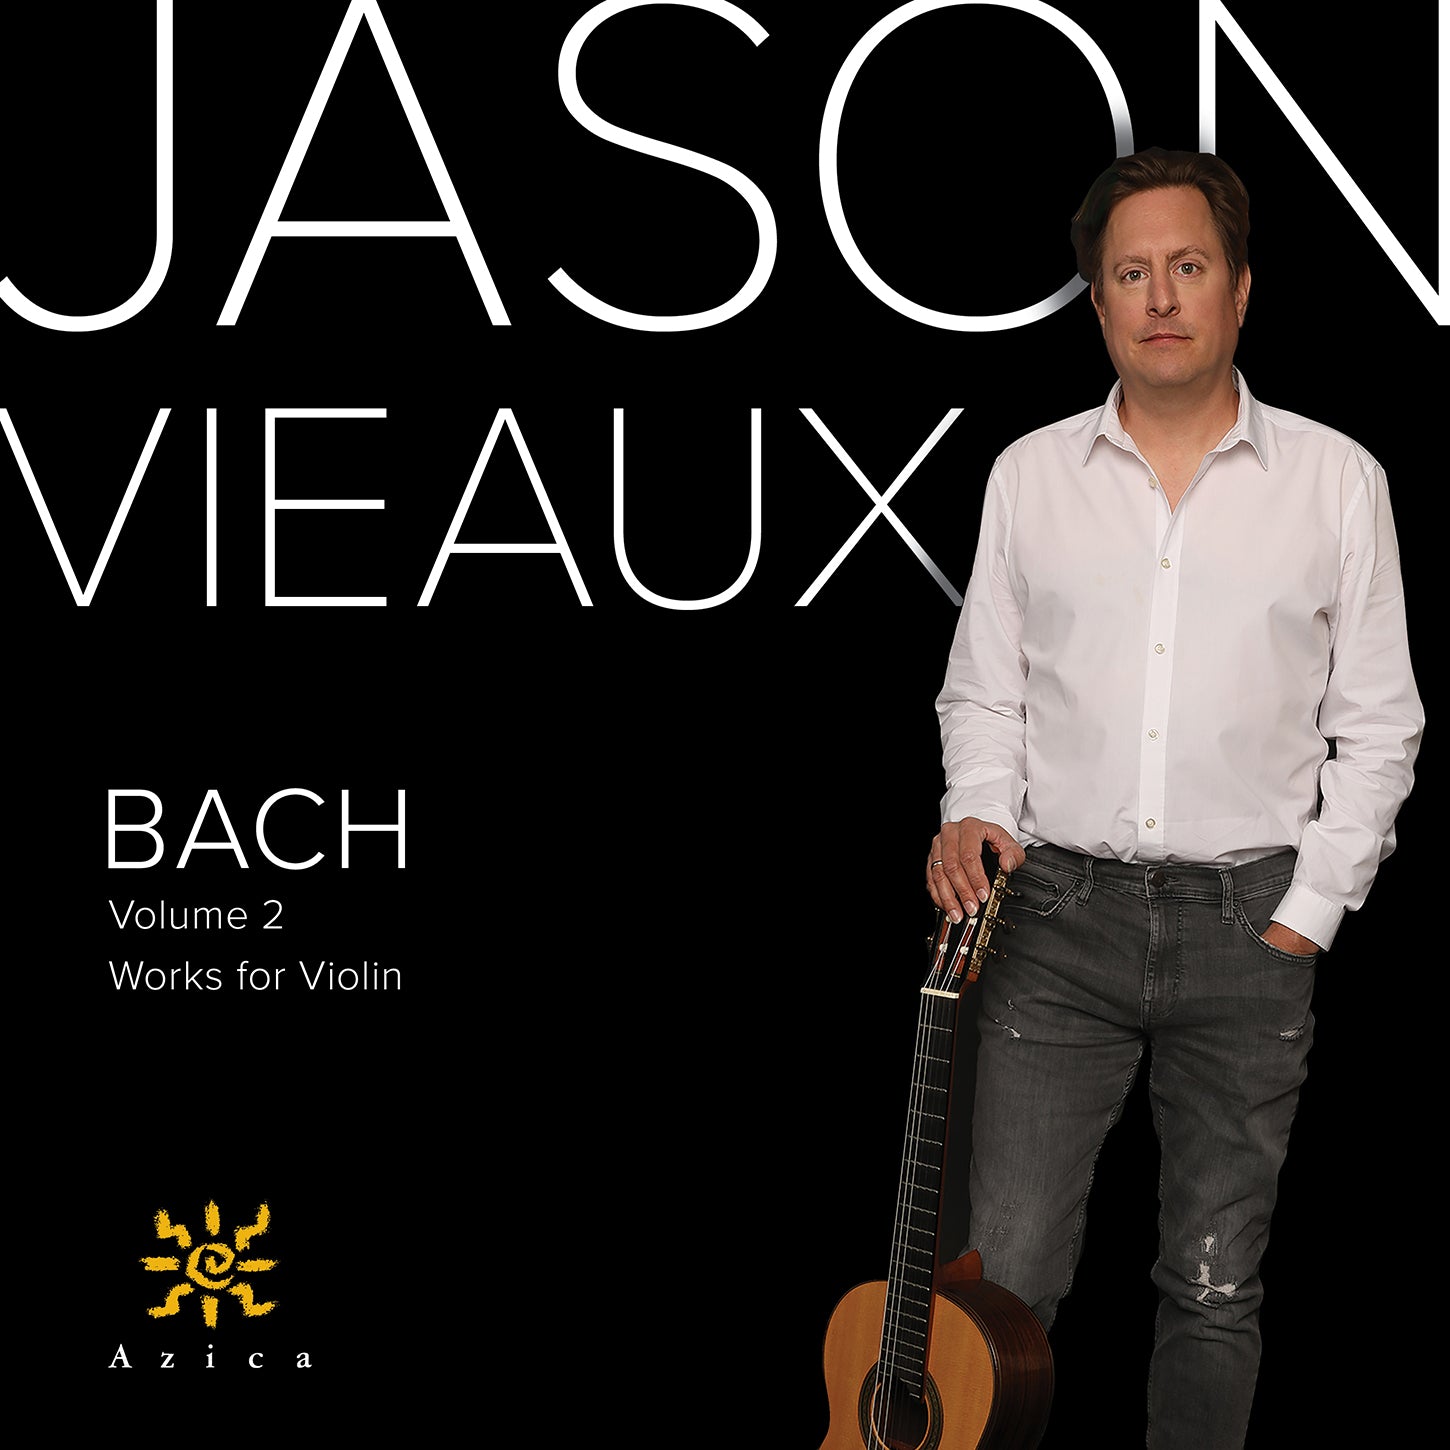 Bach: Works for Violin, Vol. 2 / Vieaux